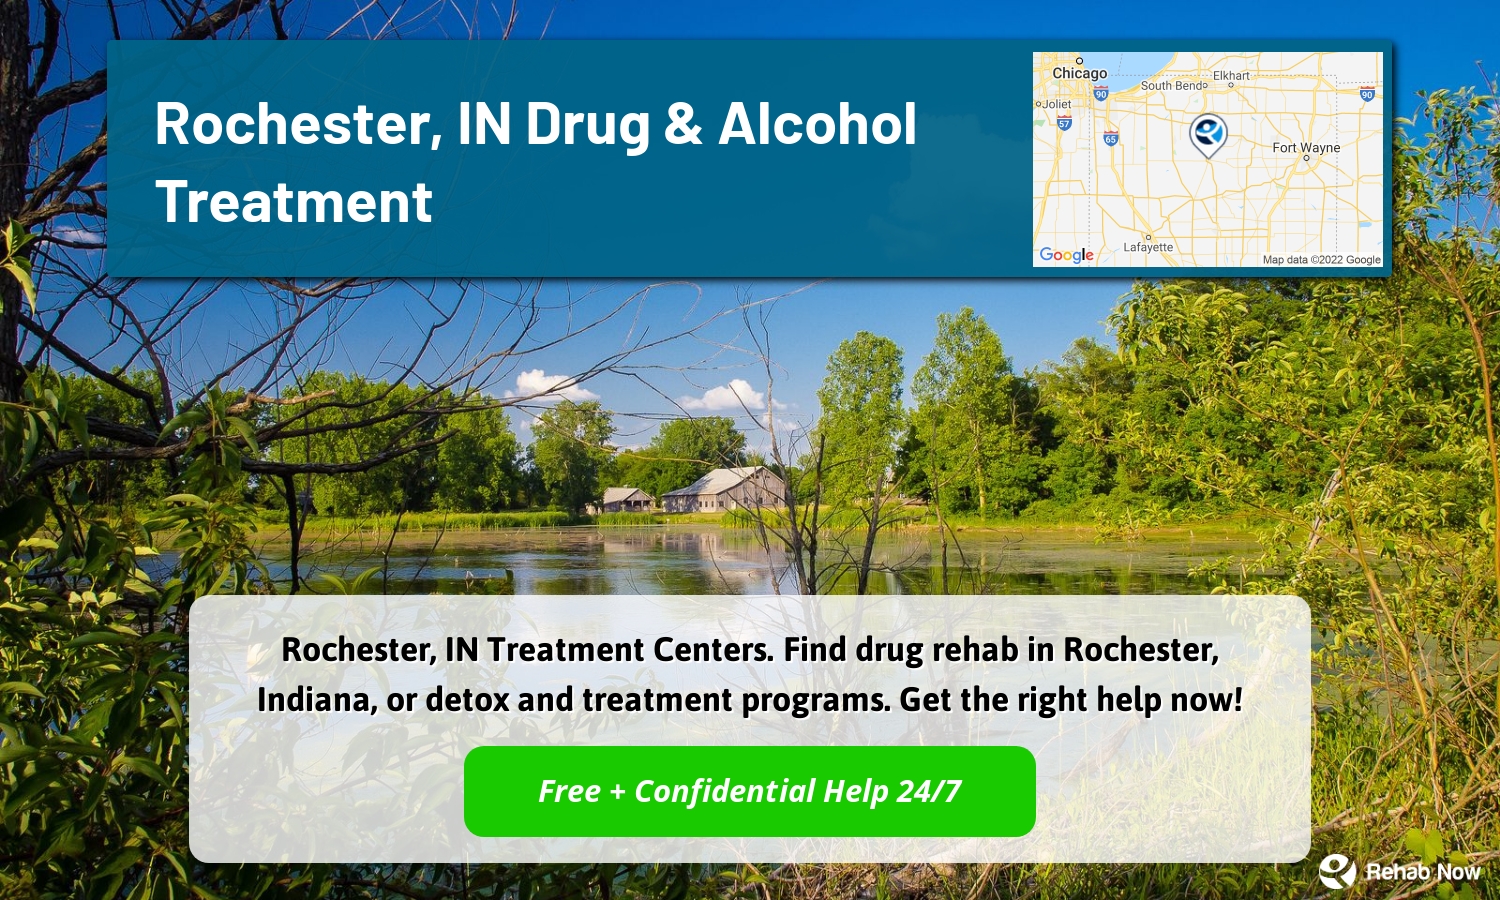 Rochester, IN Treatment Centers. Find drug rehab in Rochester, Indiana, or detox and treatment programs. Get the right help now!